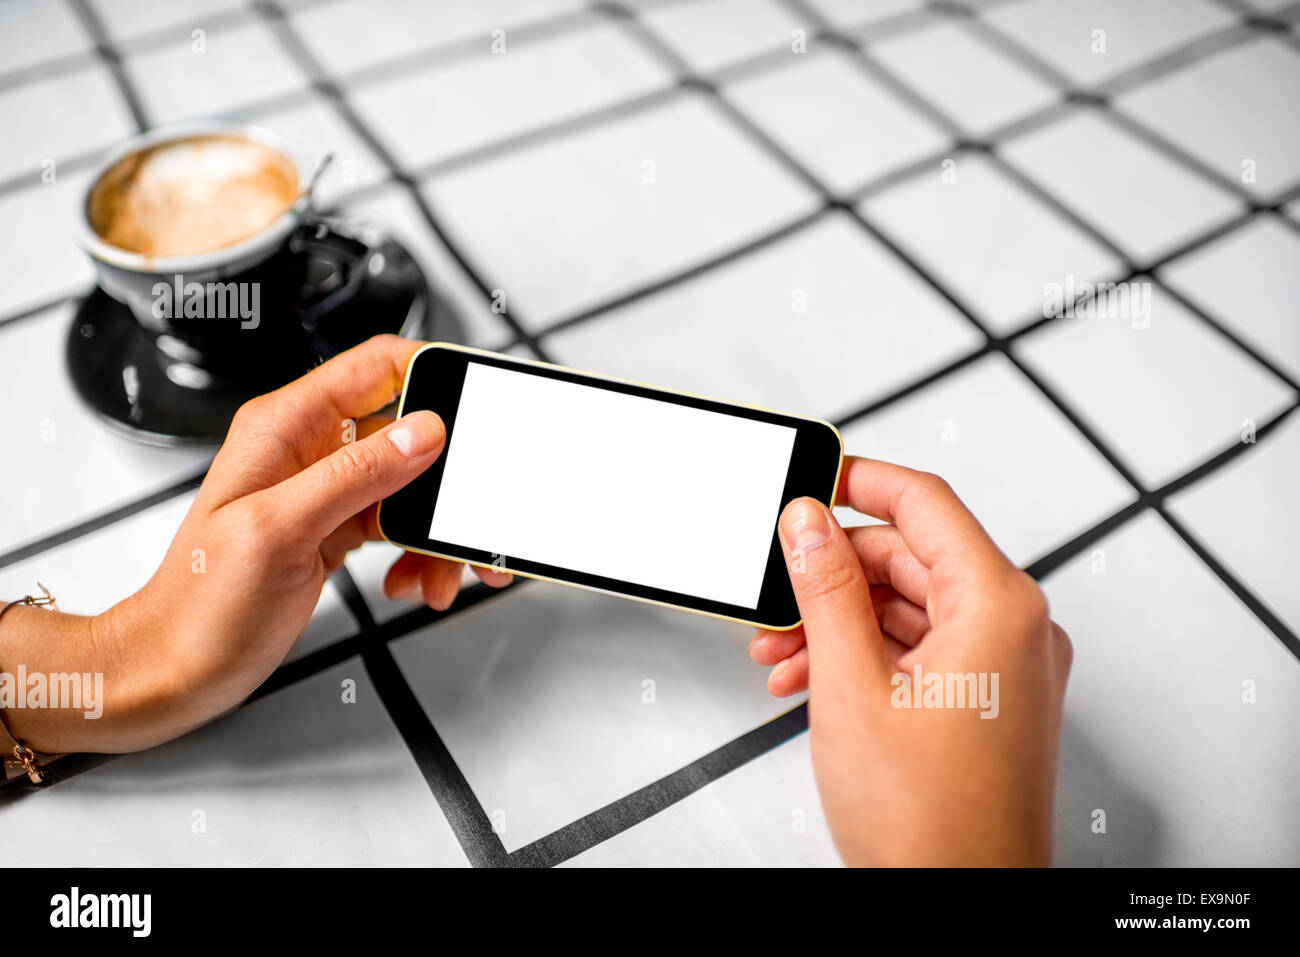 Female hand using a phone with isolated screen on checkered table with coffee cup. Stock Photo